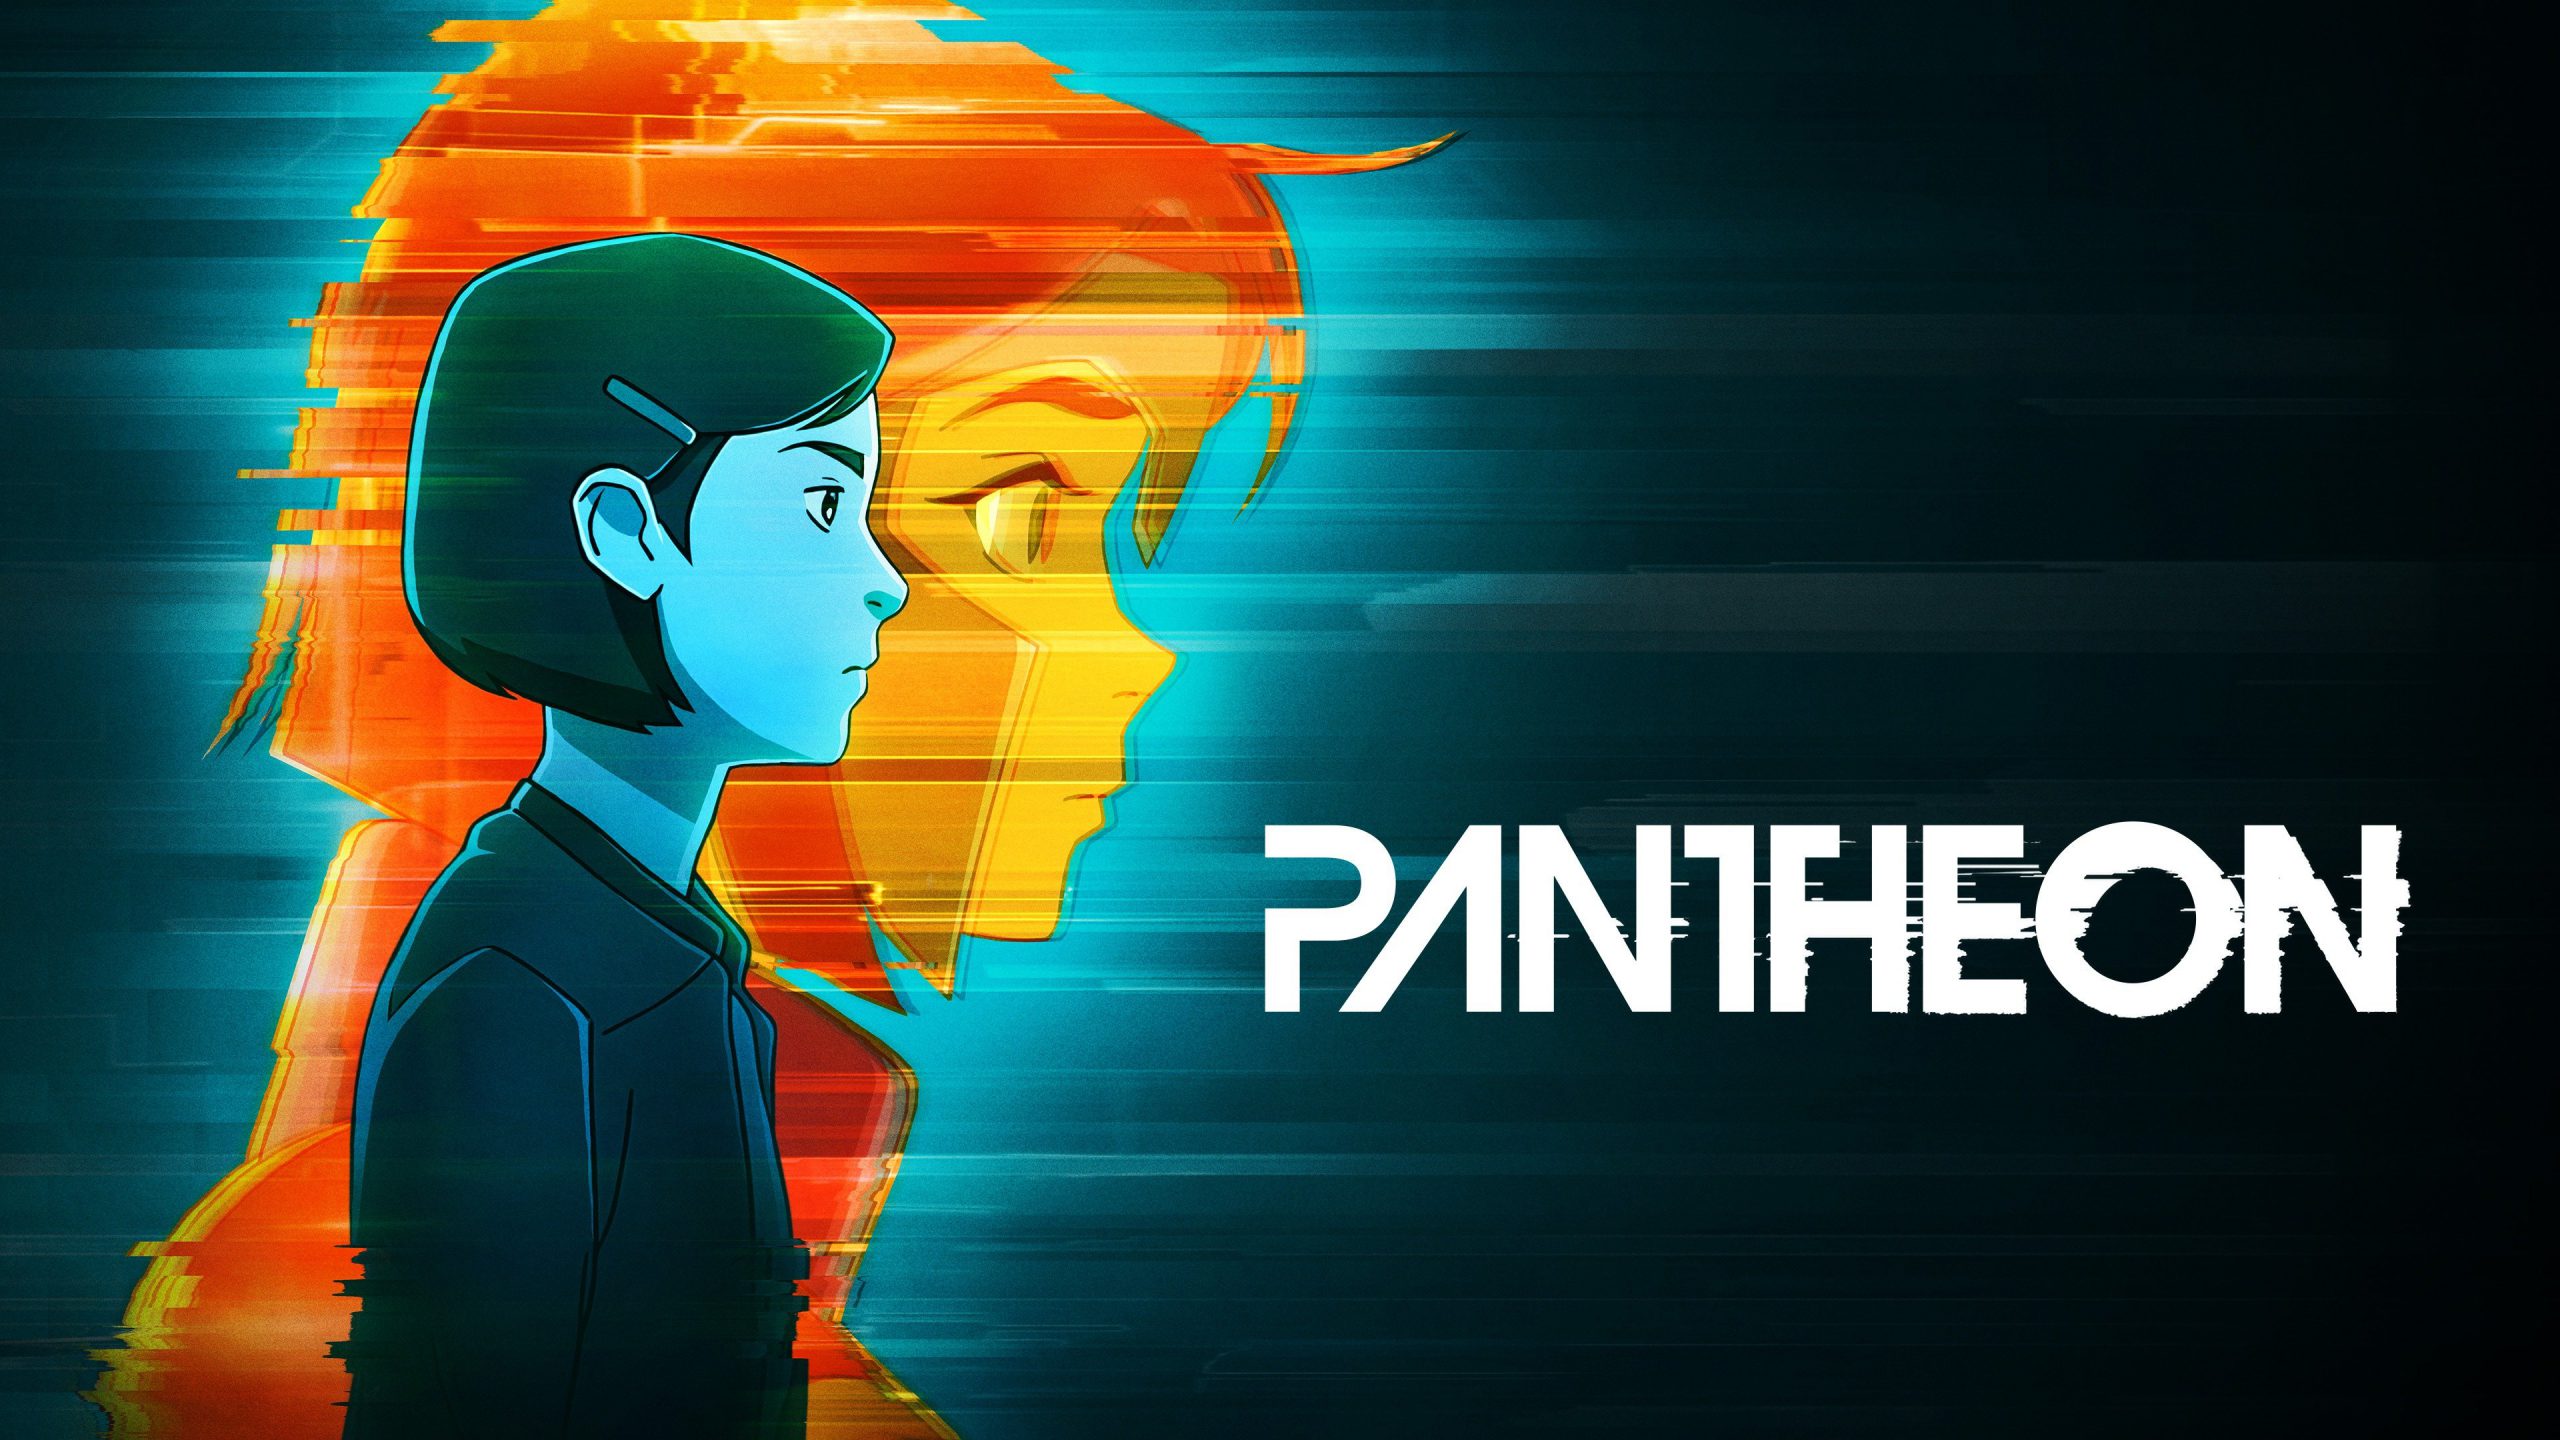 2-in-1: Two Point Classics tracks placed in AMC+’s animated science fiction series Pantheon